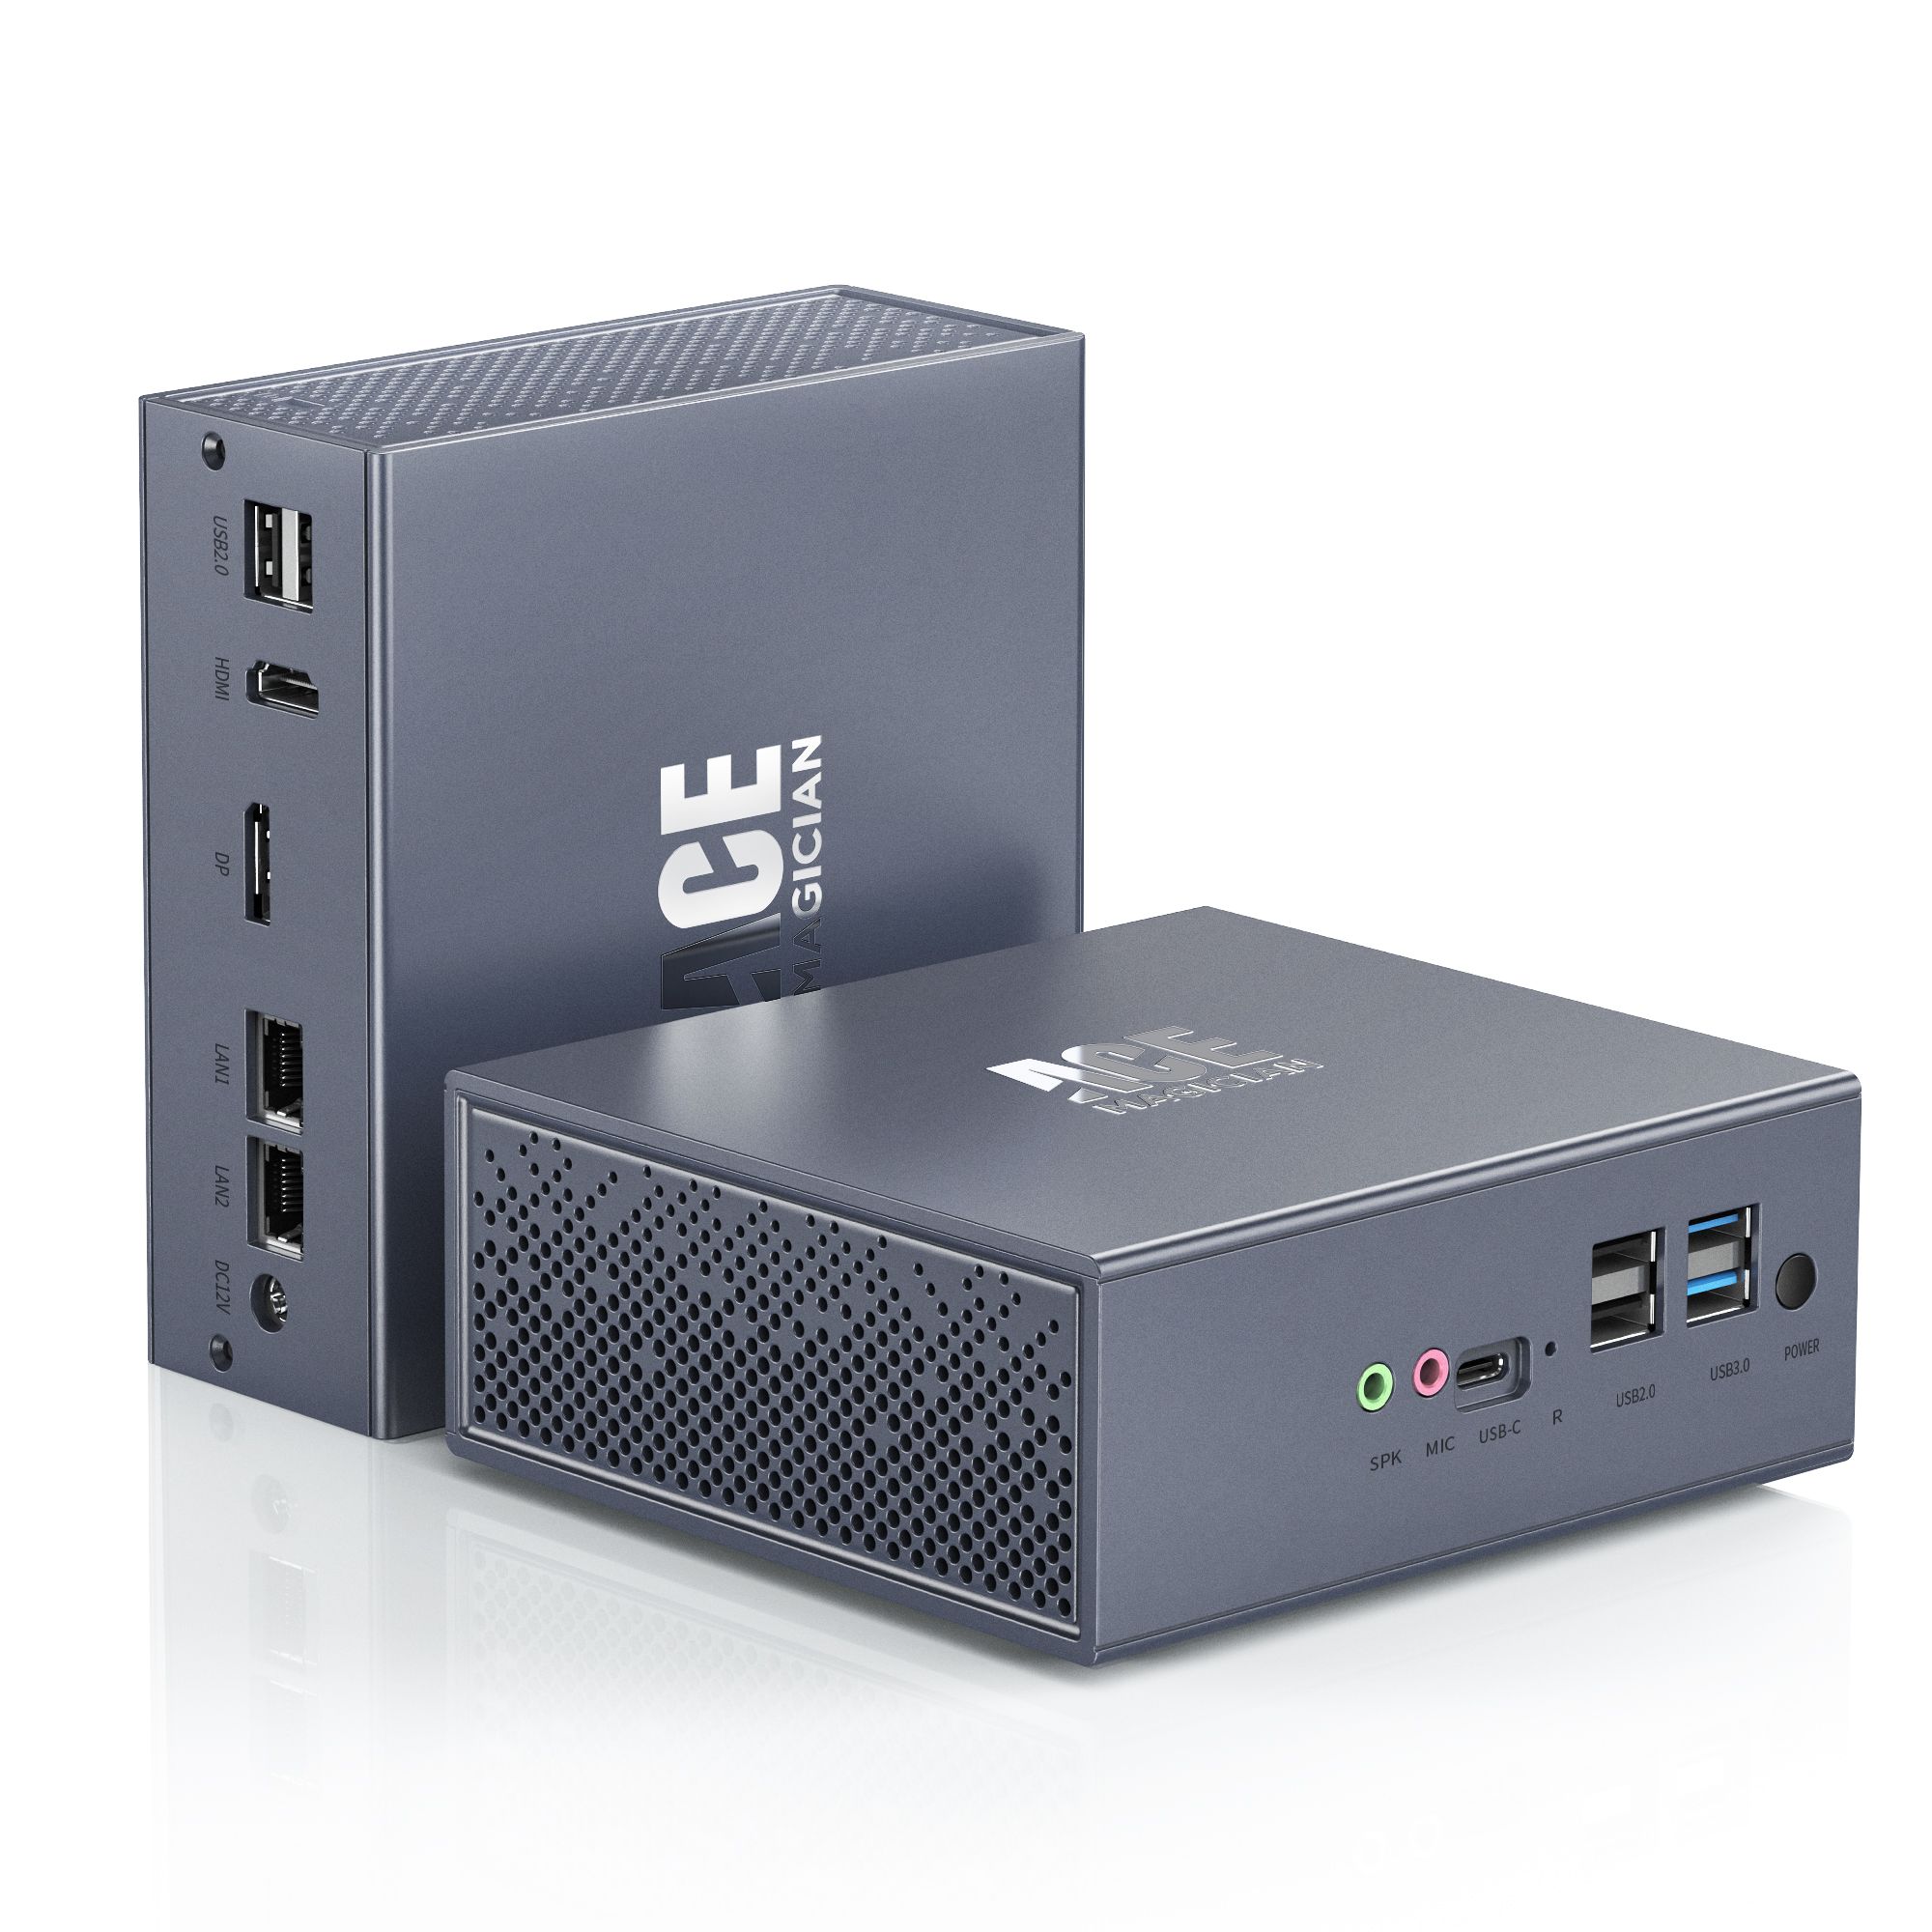 Ace Magician AD03 Review: A Solid Intel N95 CPU Mini PC